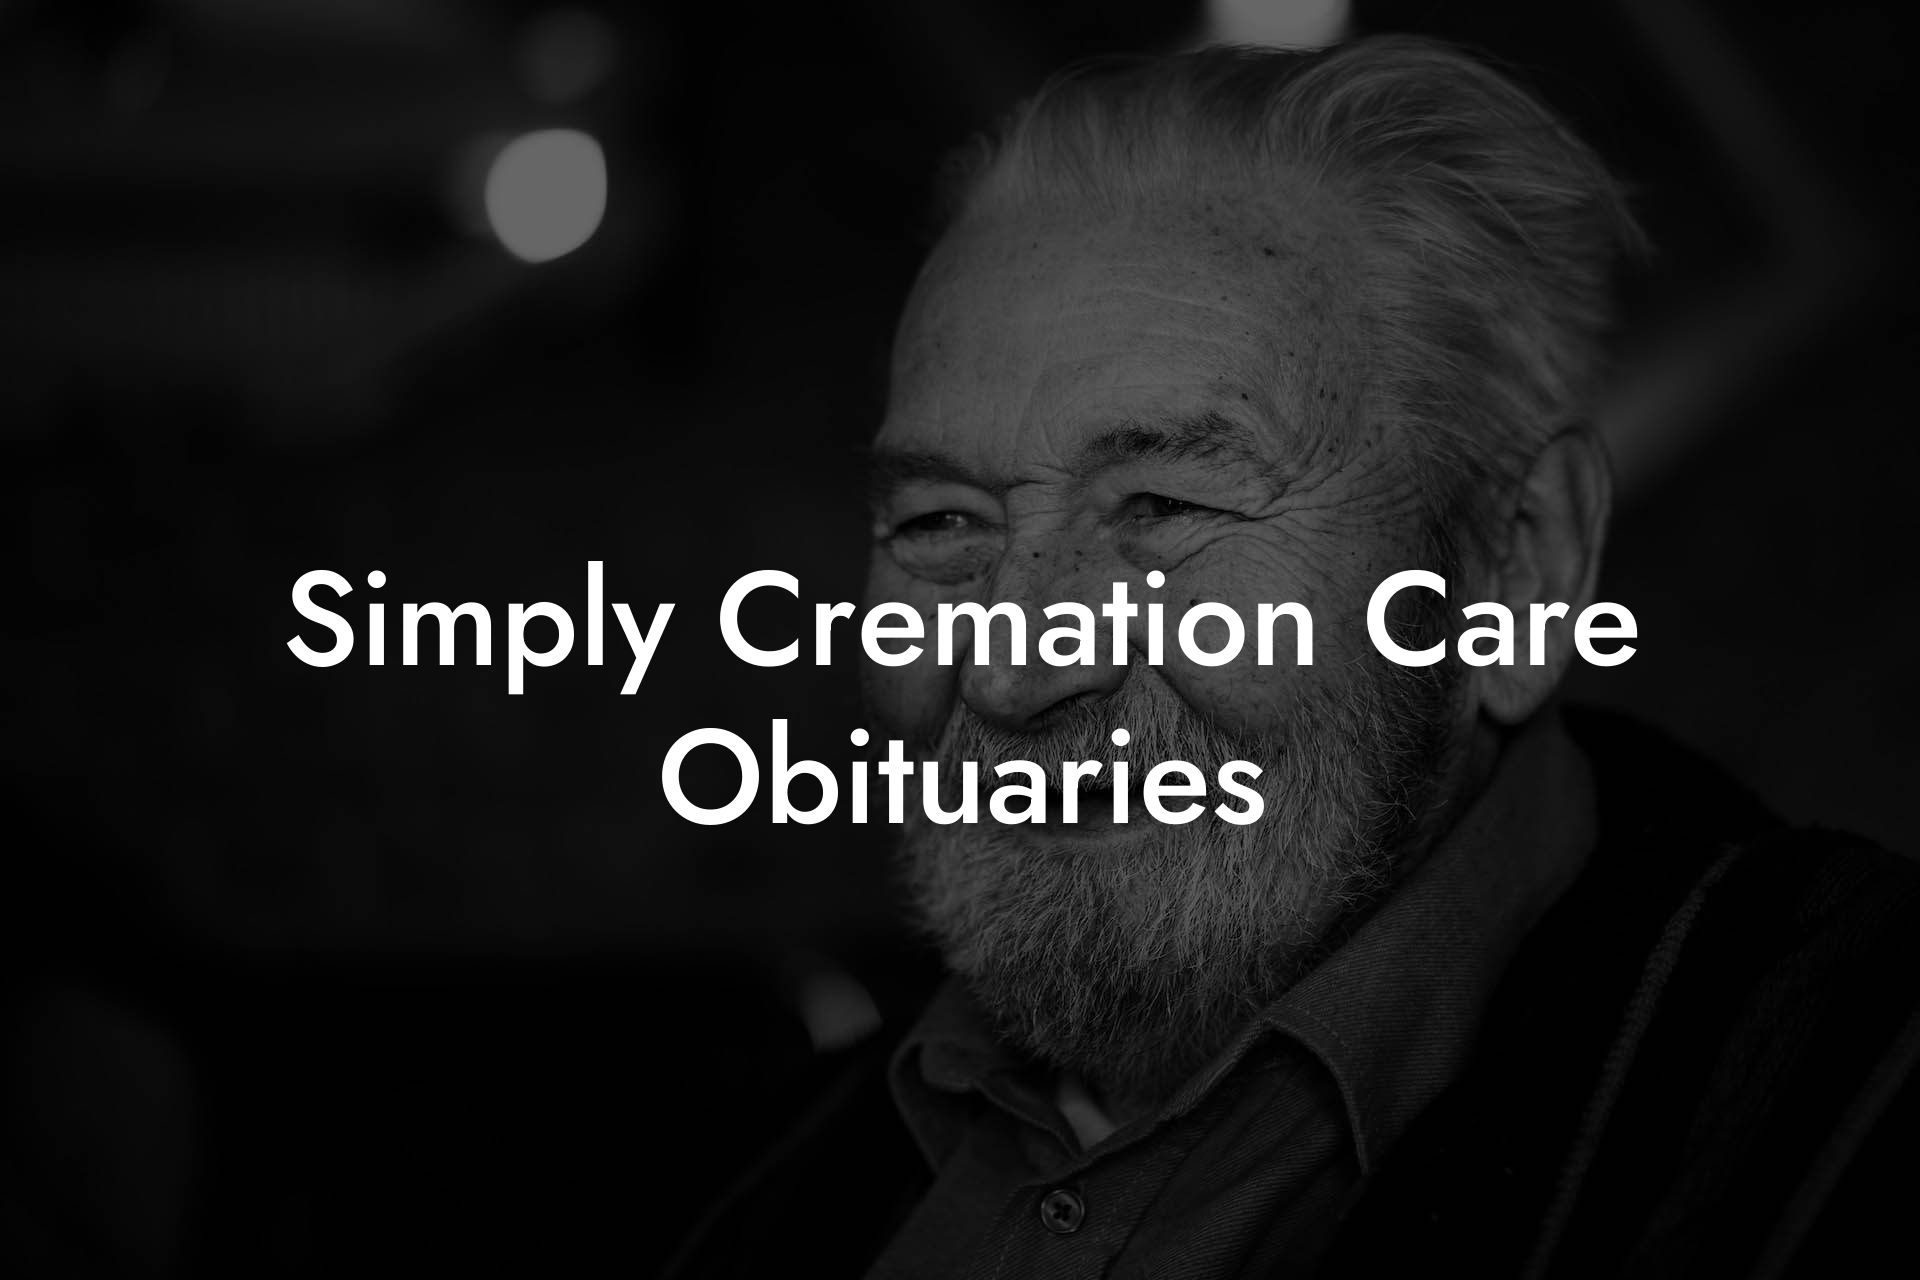 Simply Cremation Care Obituaries